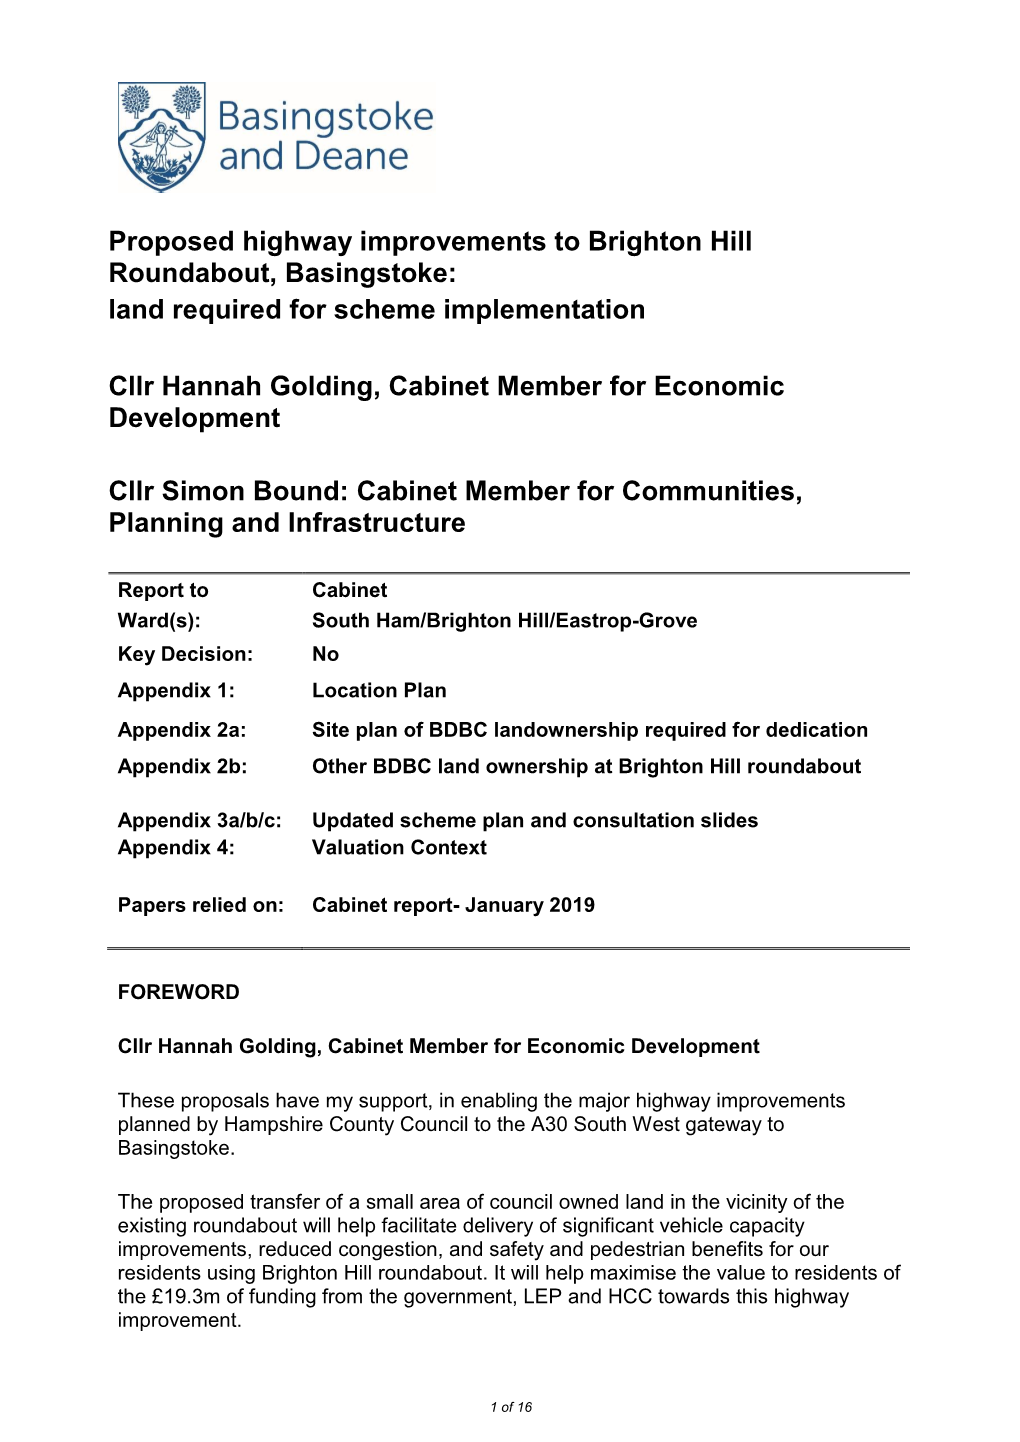 Proposed Highway Improvements to Brighton Hill Roundabout, Basingstoke: Land Required for Scheme Implementation